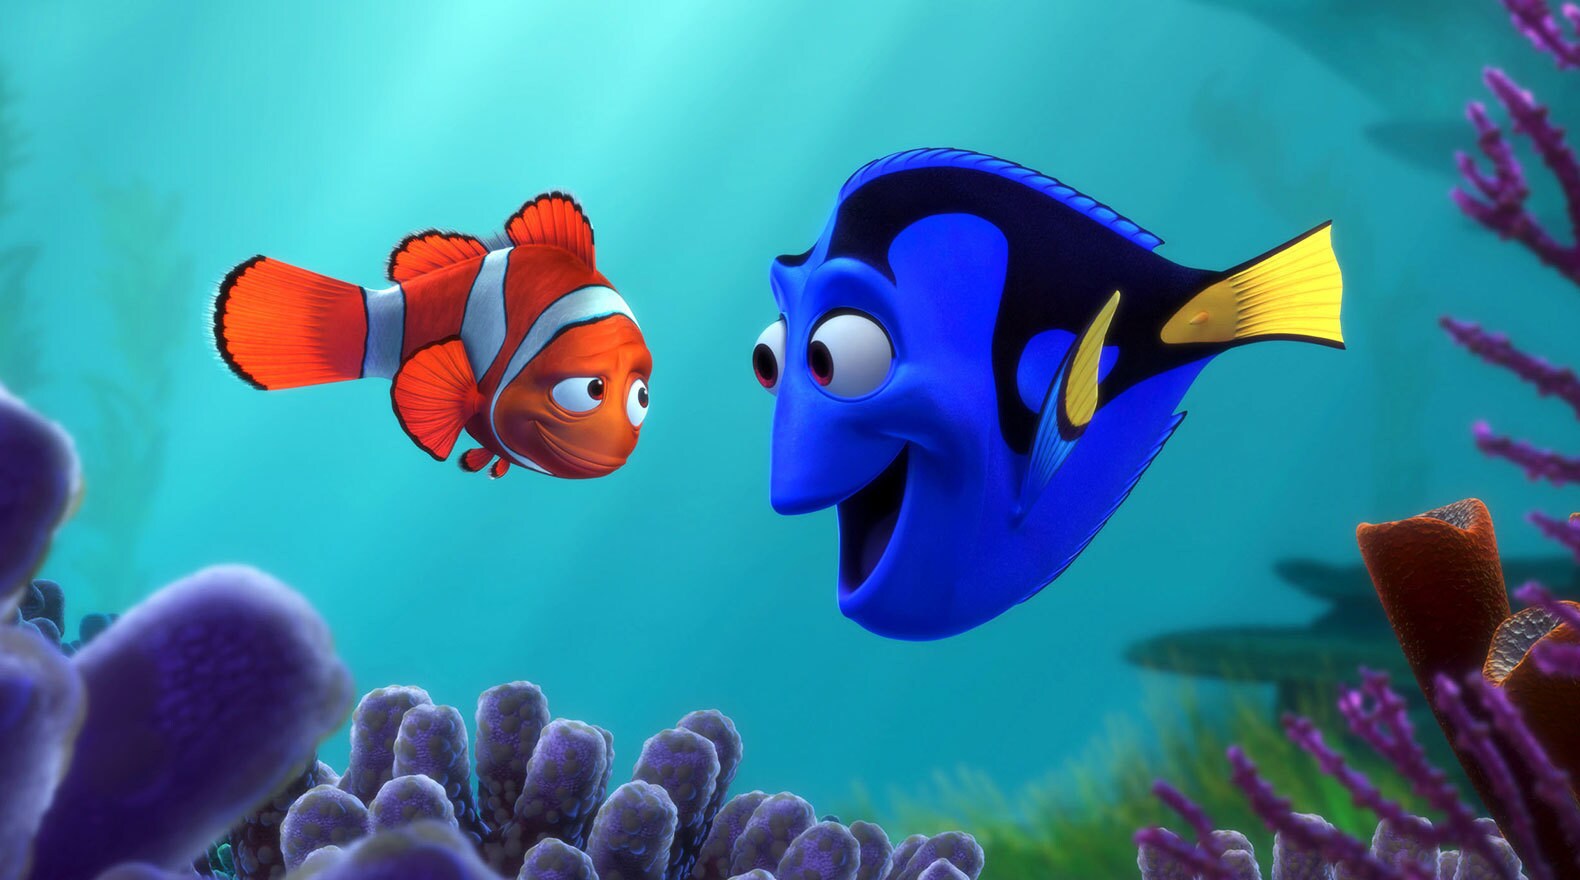  Marlin (Albert Brooks) looking quizzically at Dory (Ellen DeGeneres) surrounded by coral reef in "Finding Dory" 